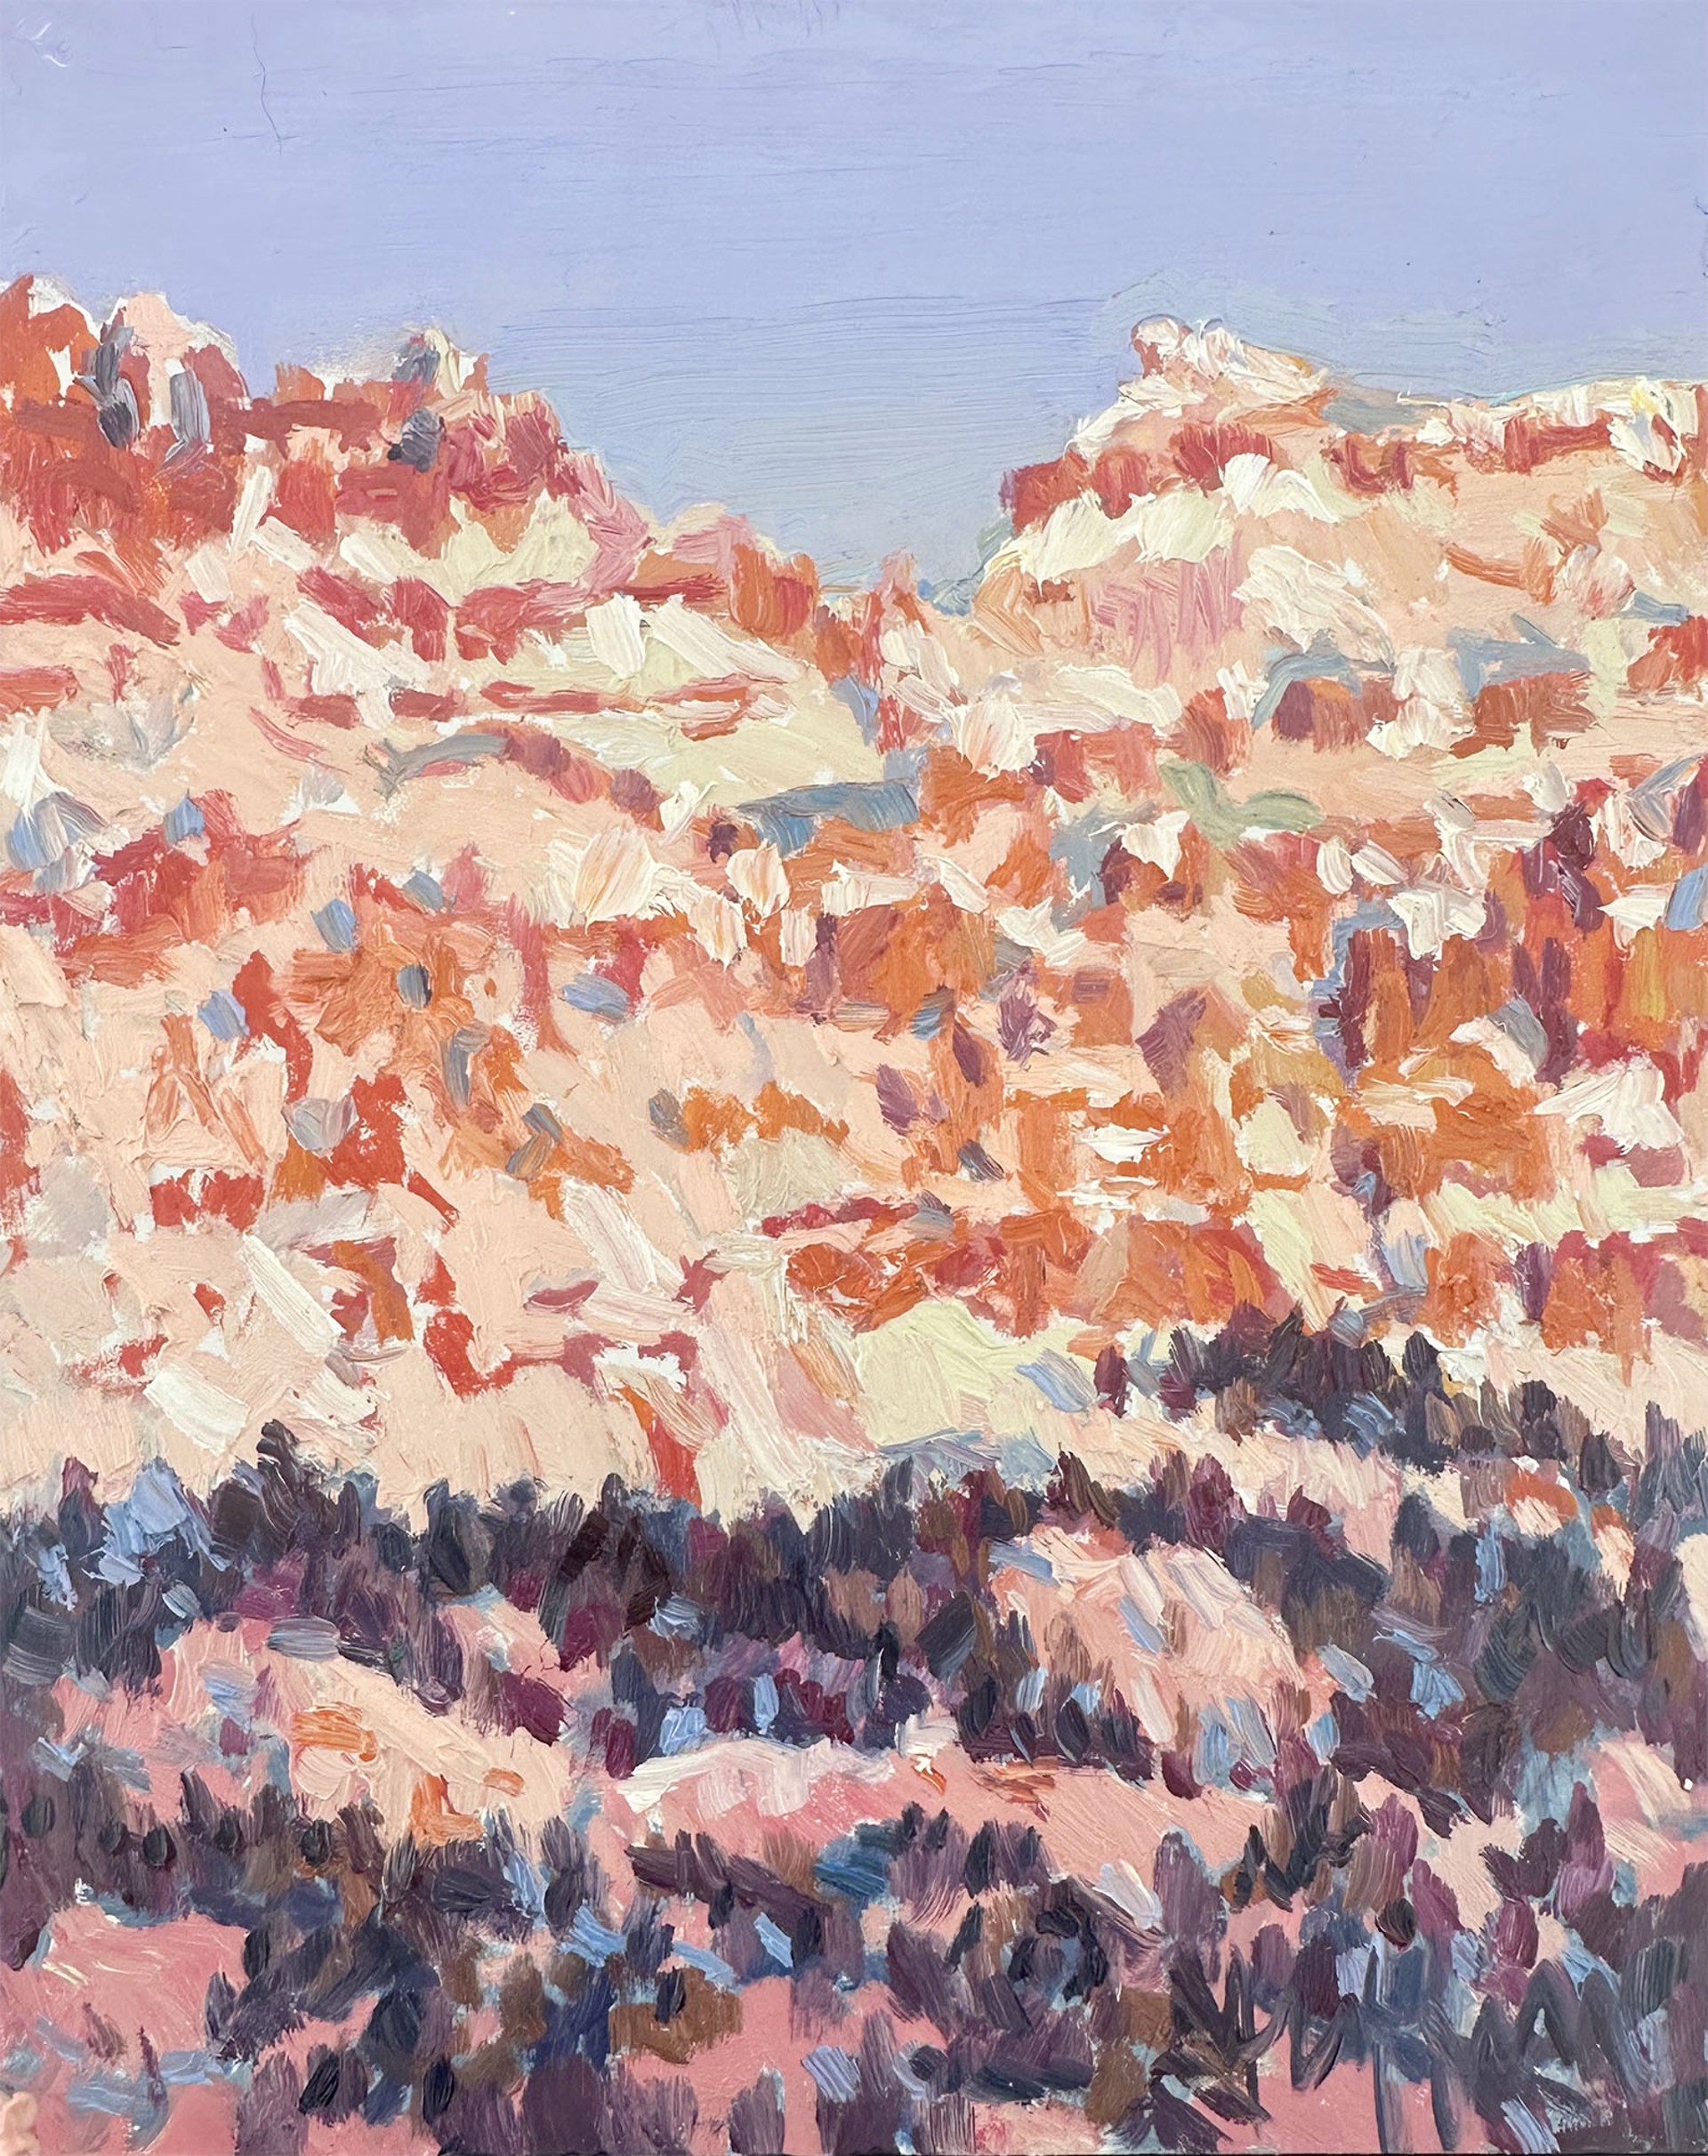 Original Oil Painting By Patricia Griffin Featuring A Snow Covered Rock Face